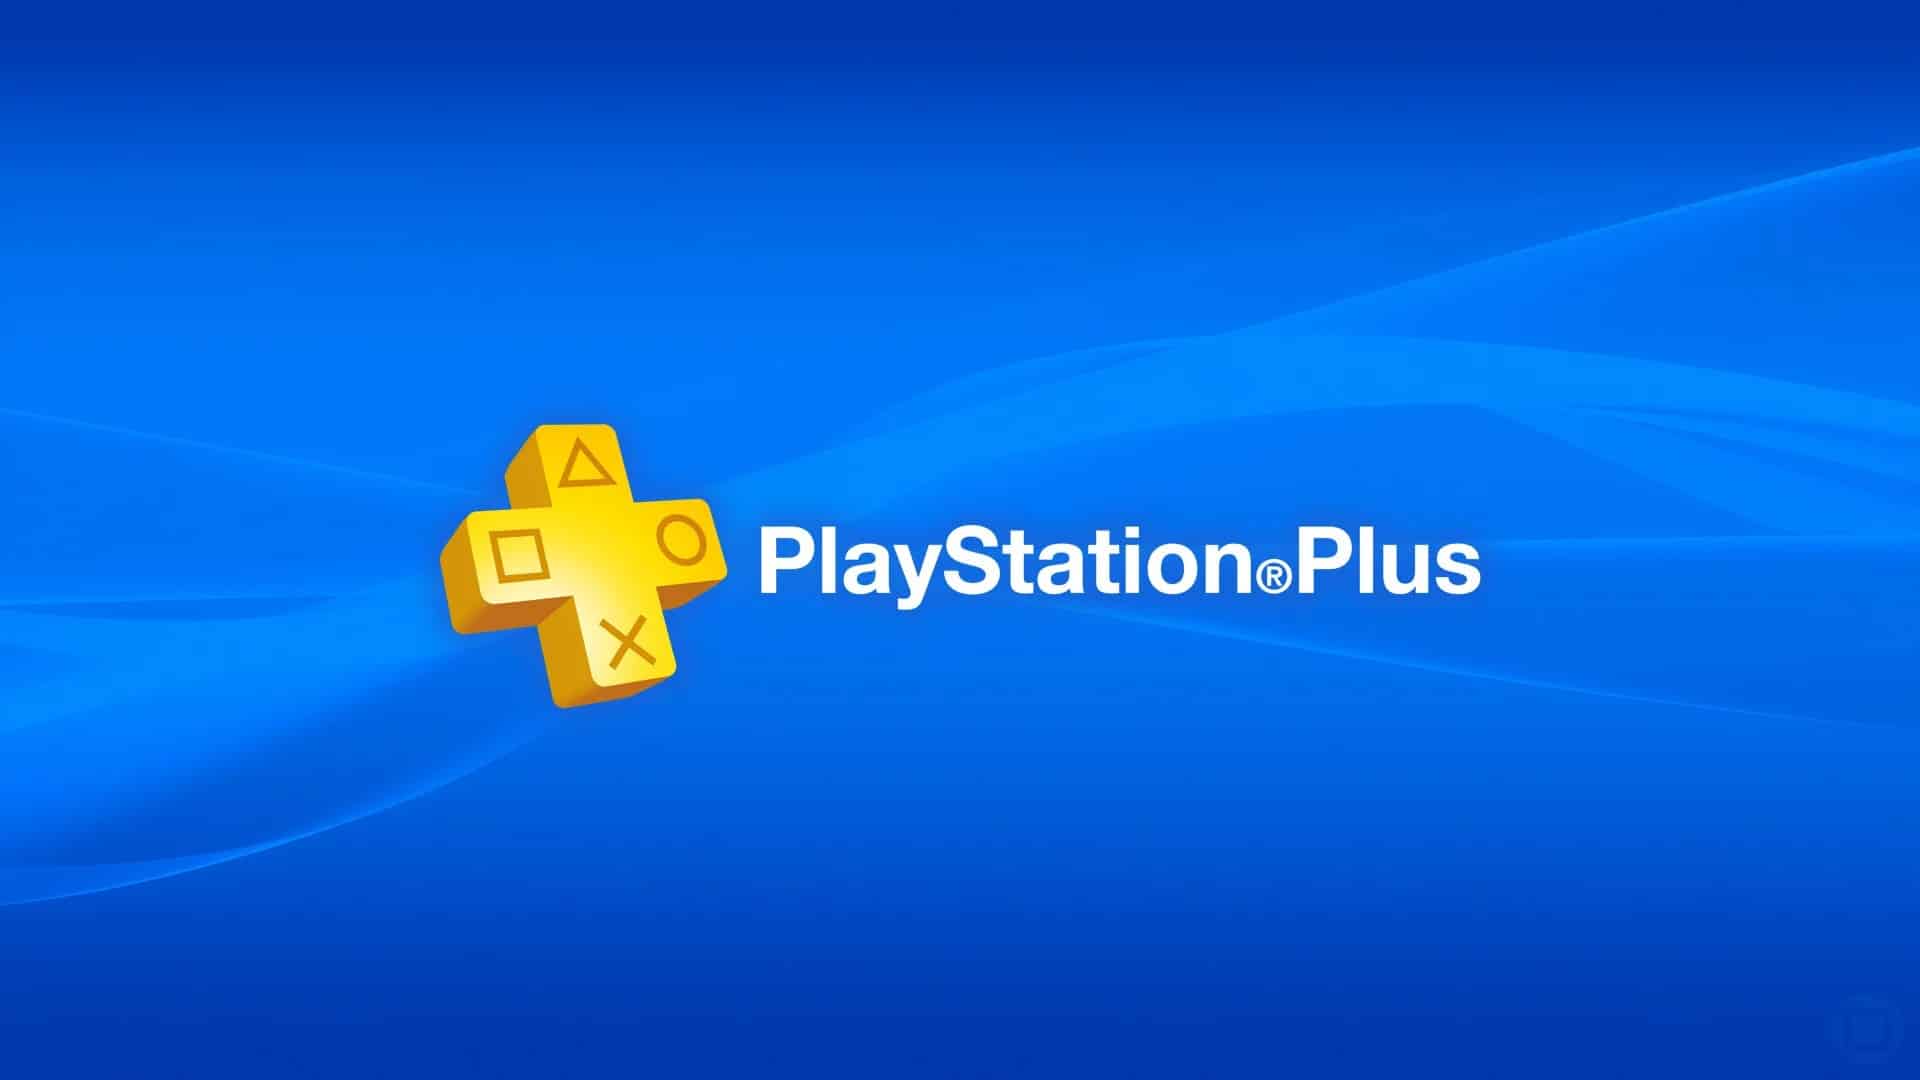 January 2021 PlayStation Plus Lineup Revealed – Kicking Off 2021 With a Bang